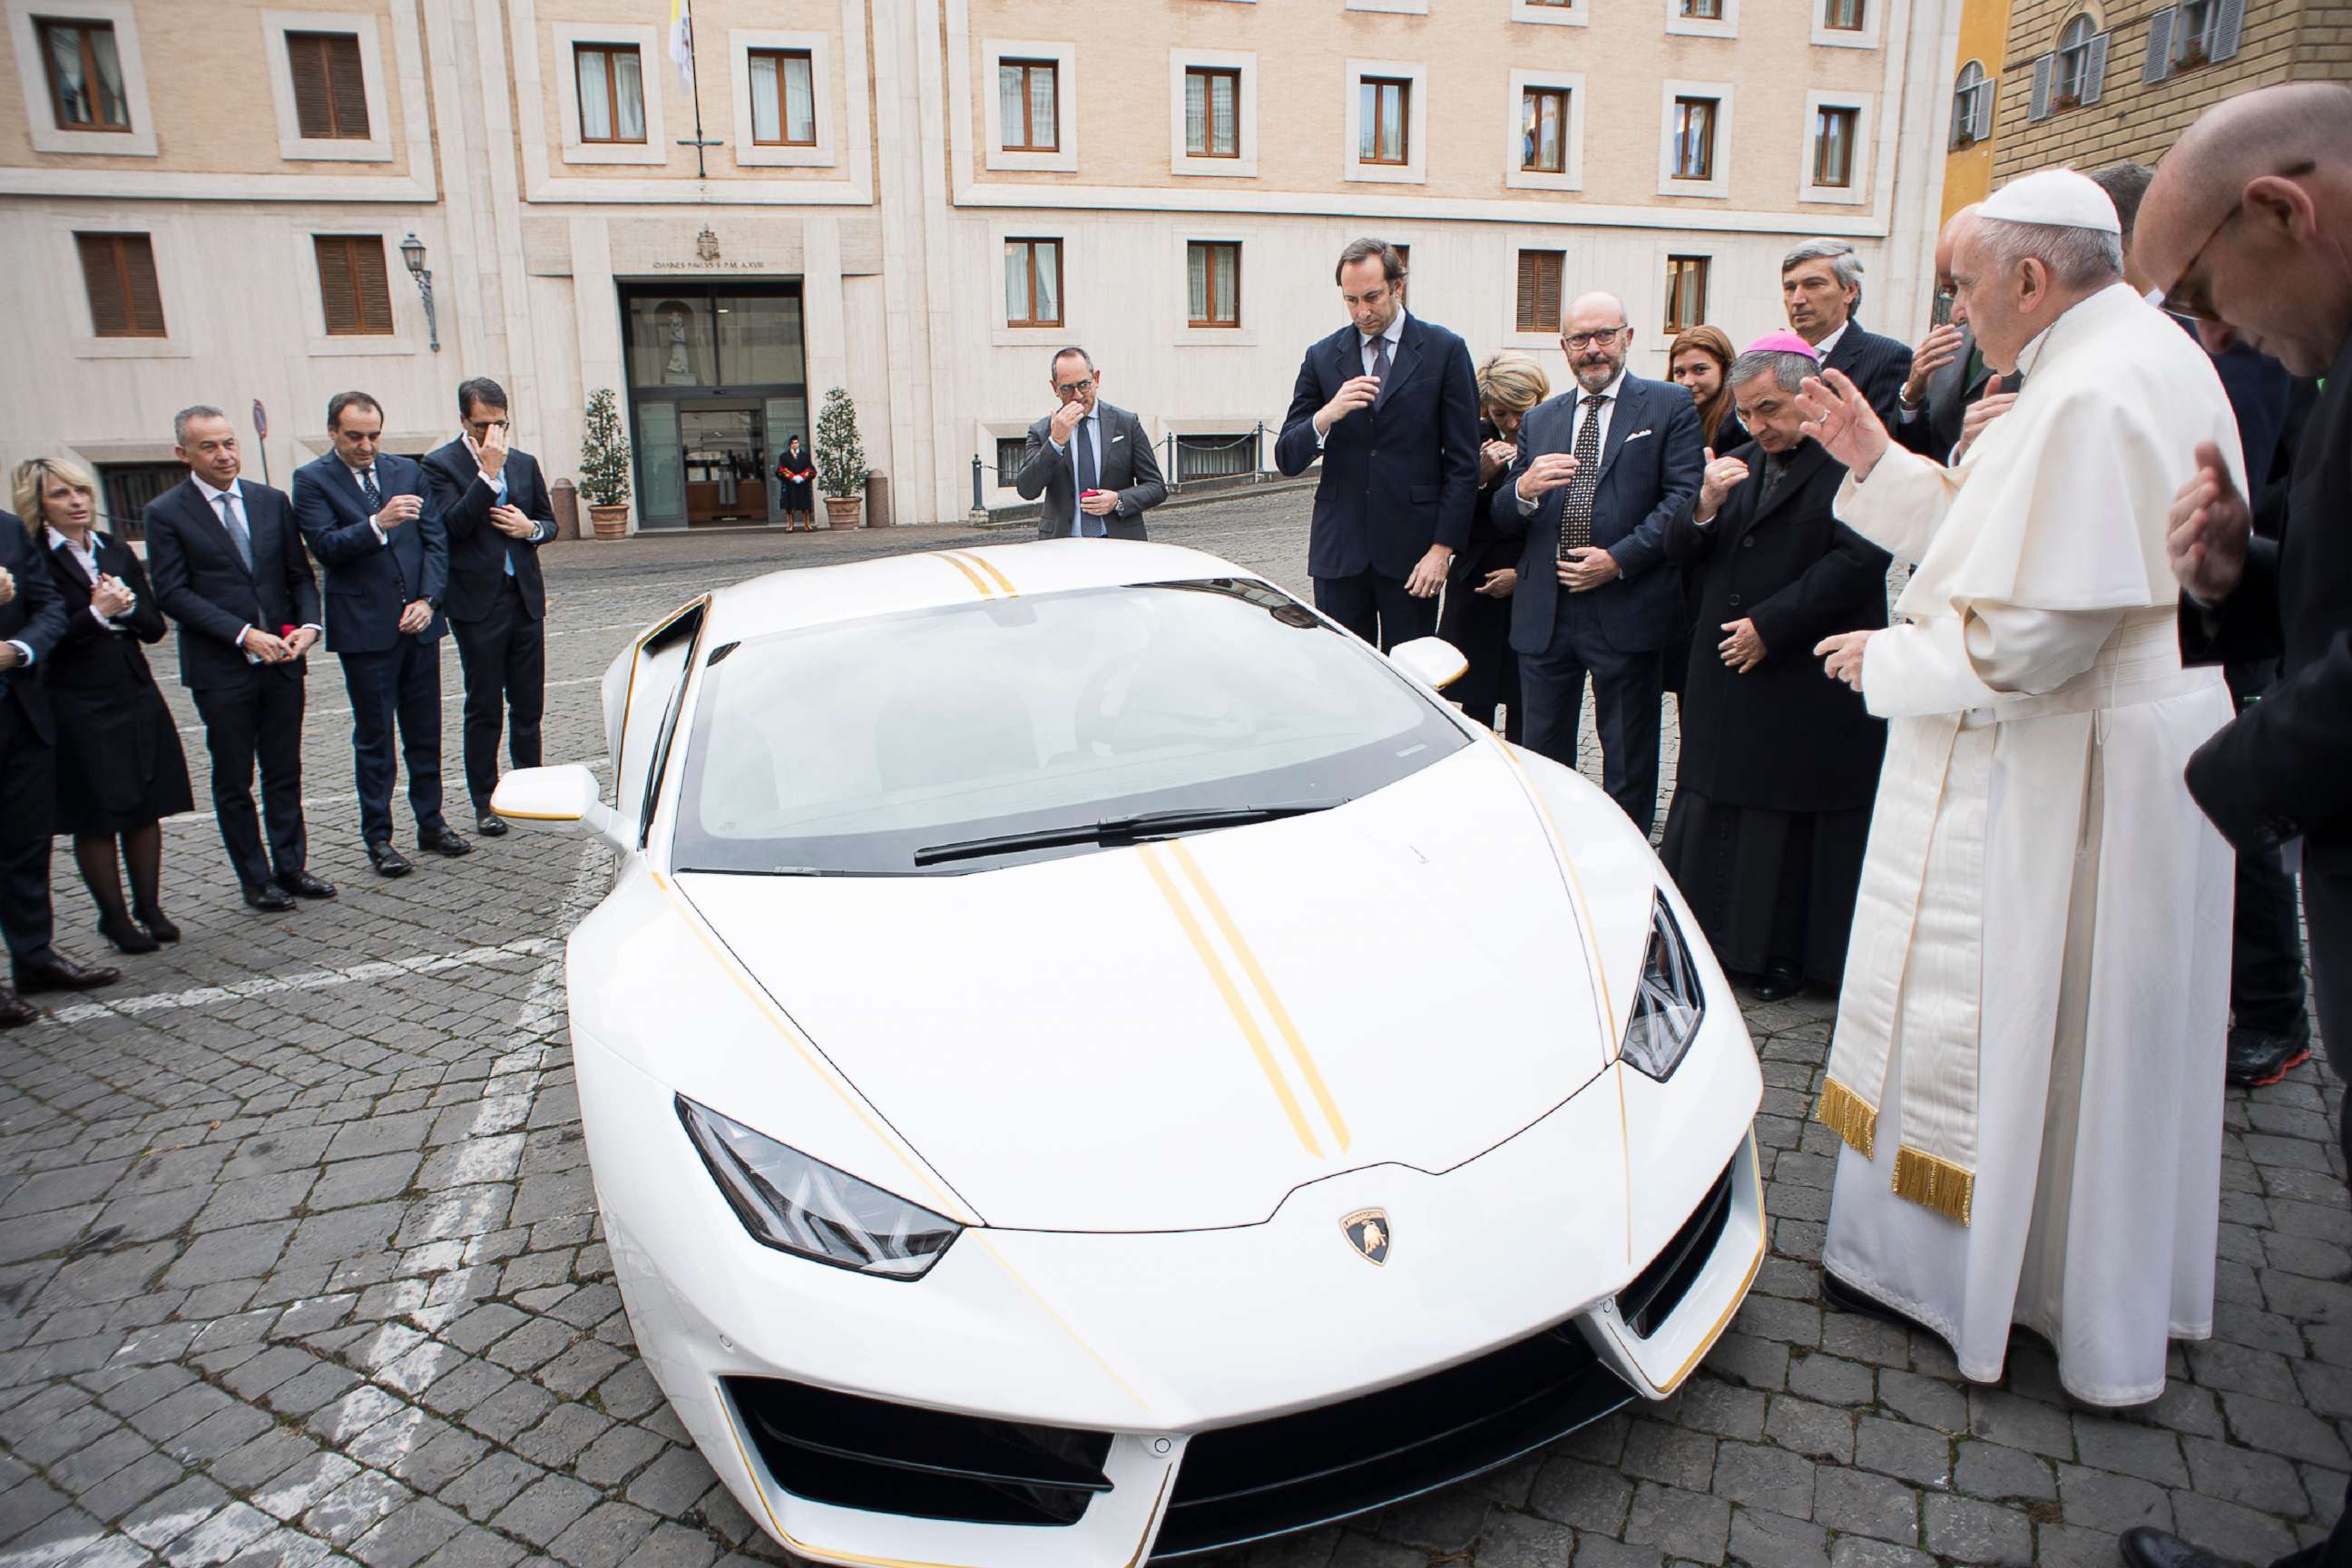 PHOTO: Pope Francis blesses a Lamborghini Huracan which was gifted to him from the Italian car company, Nov. 15, 2017, at the Vatican and released by the Vatican press office, Osservatore Romano.